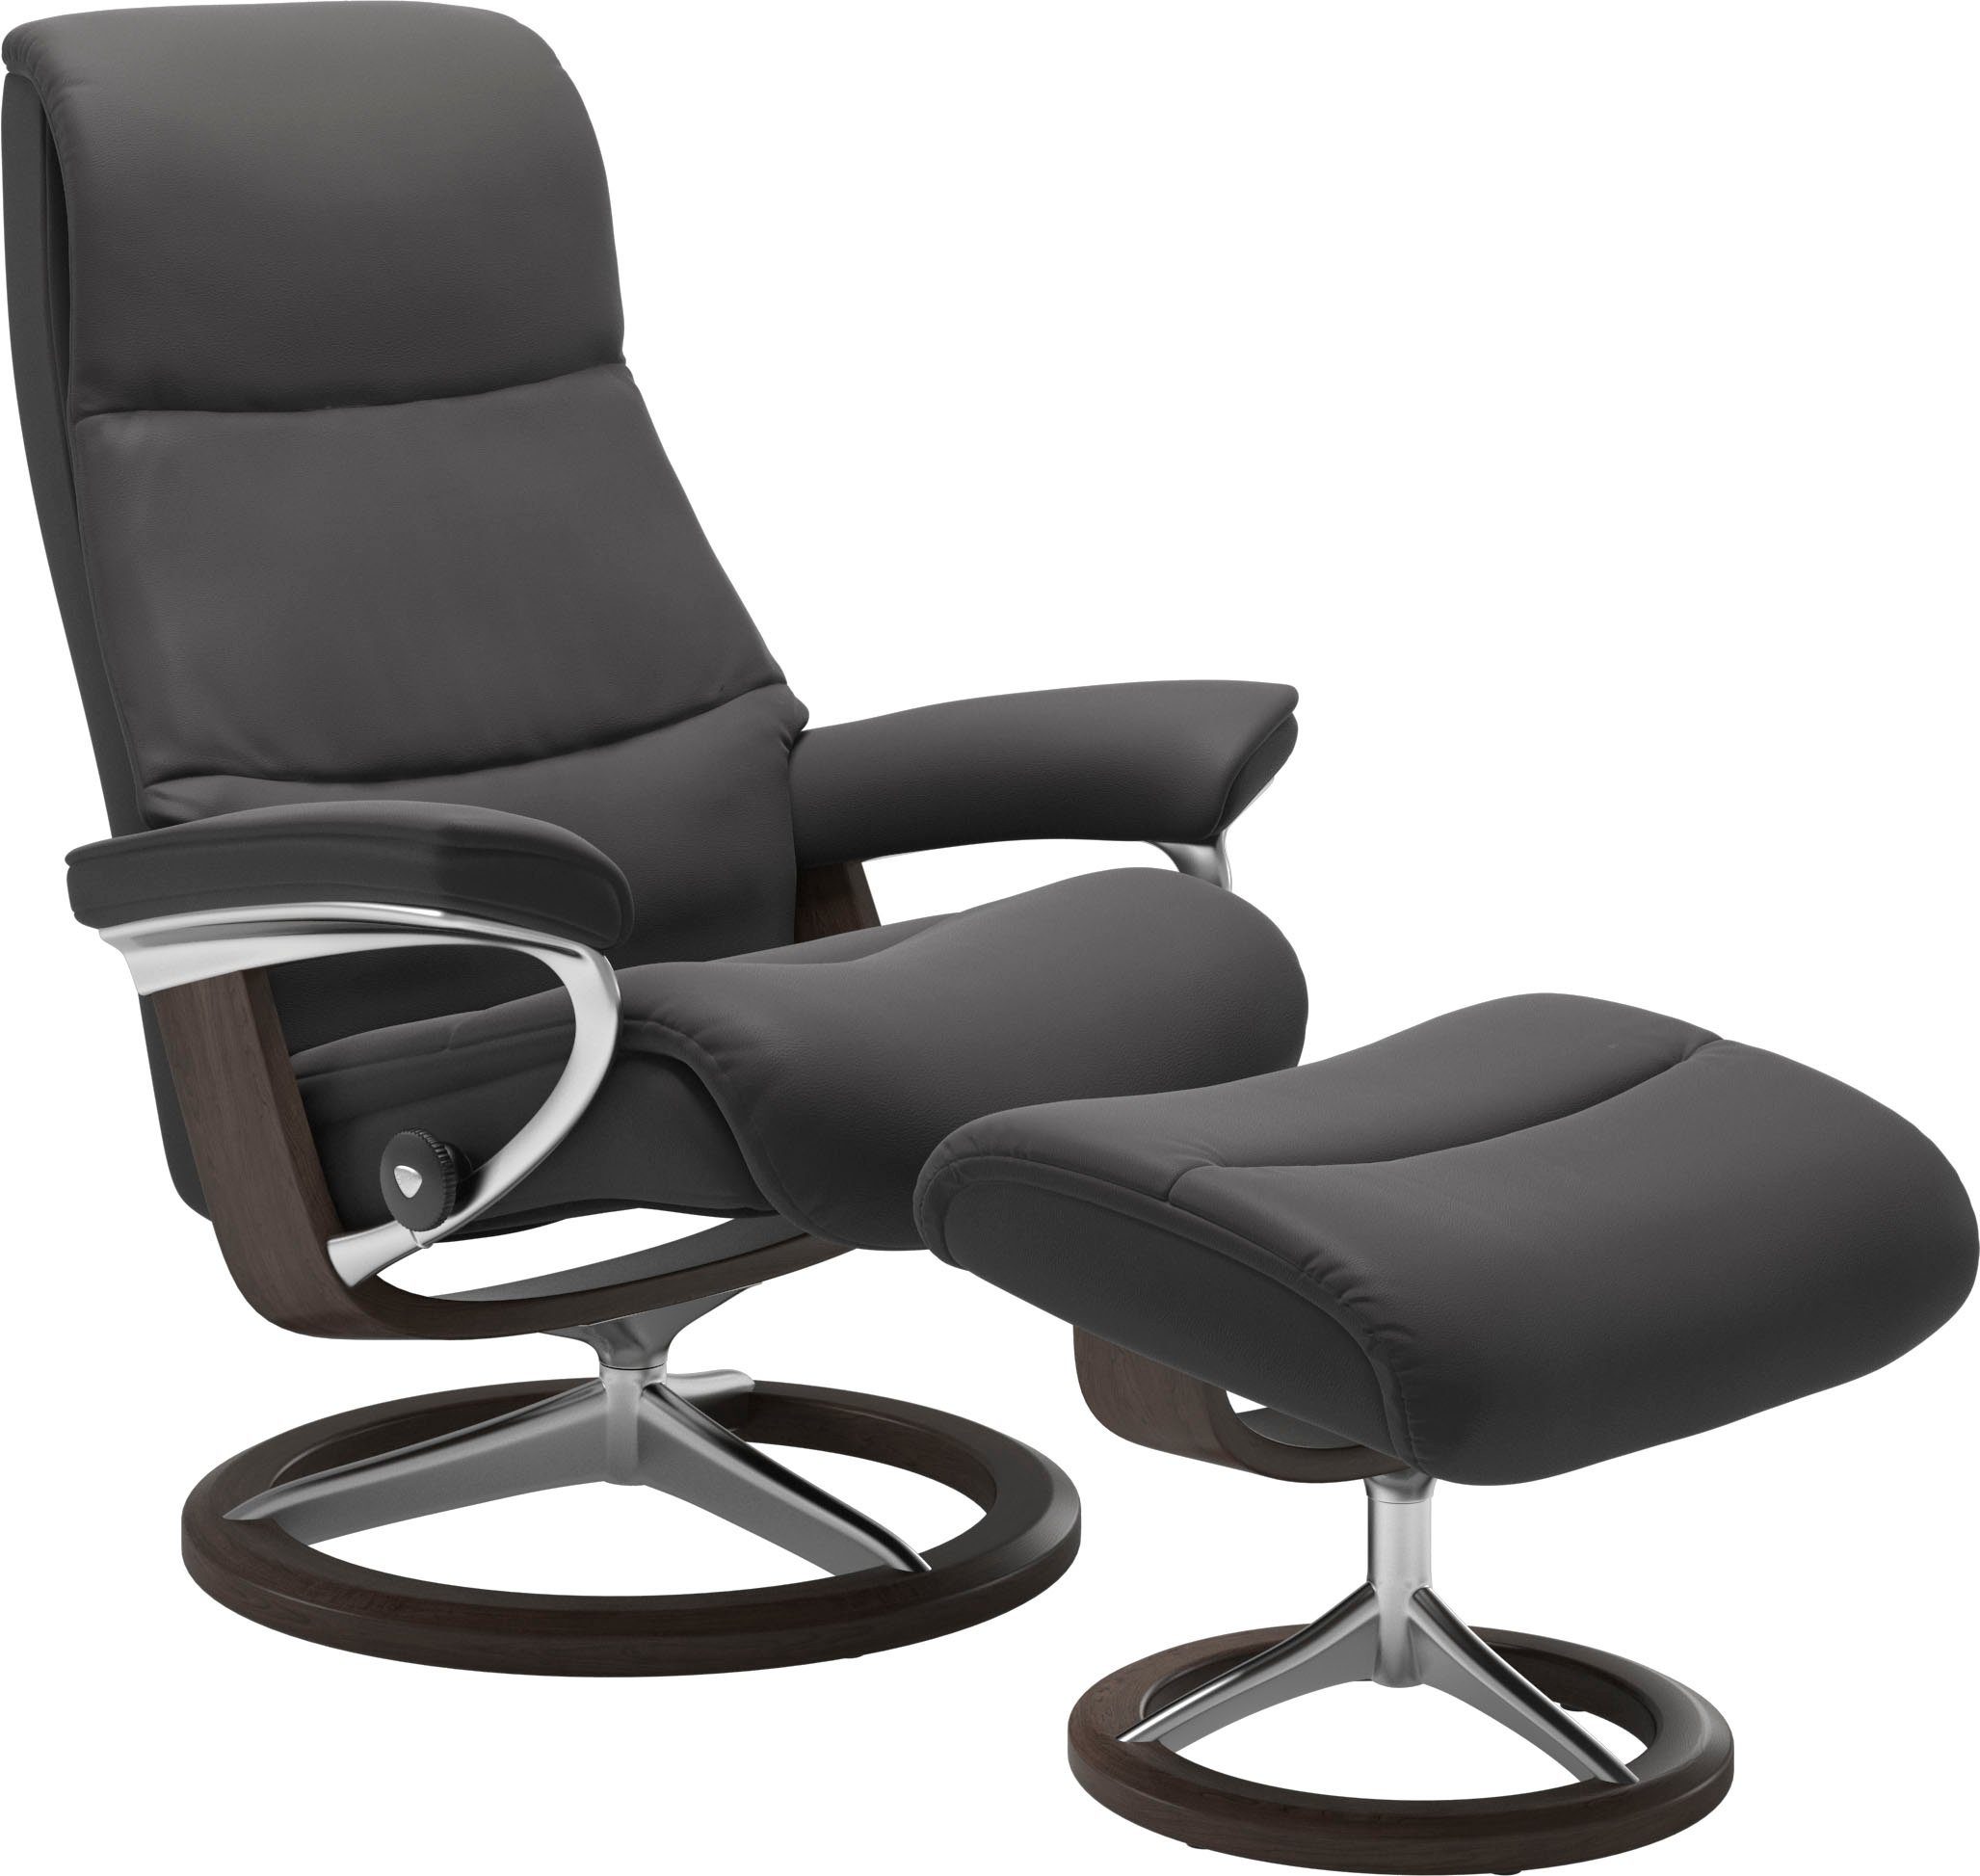 Stressless® Relaxsessel Base, Größe Signature mit Wenge View, S,Gestell